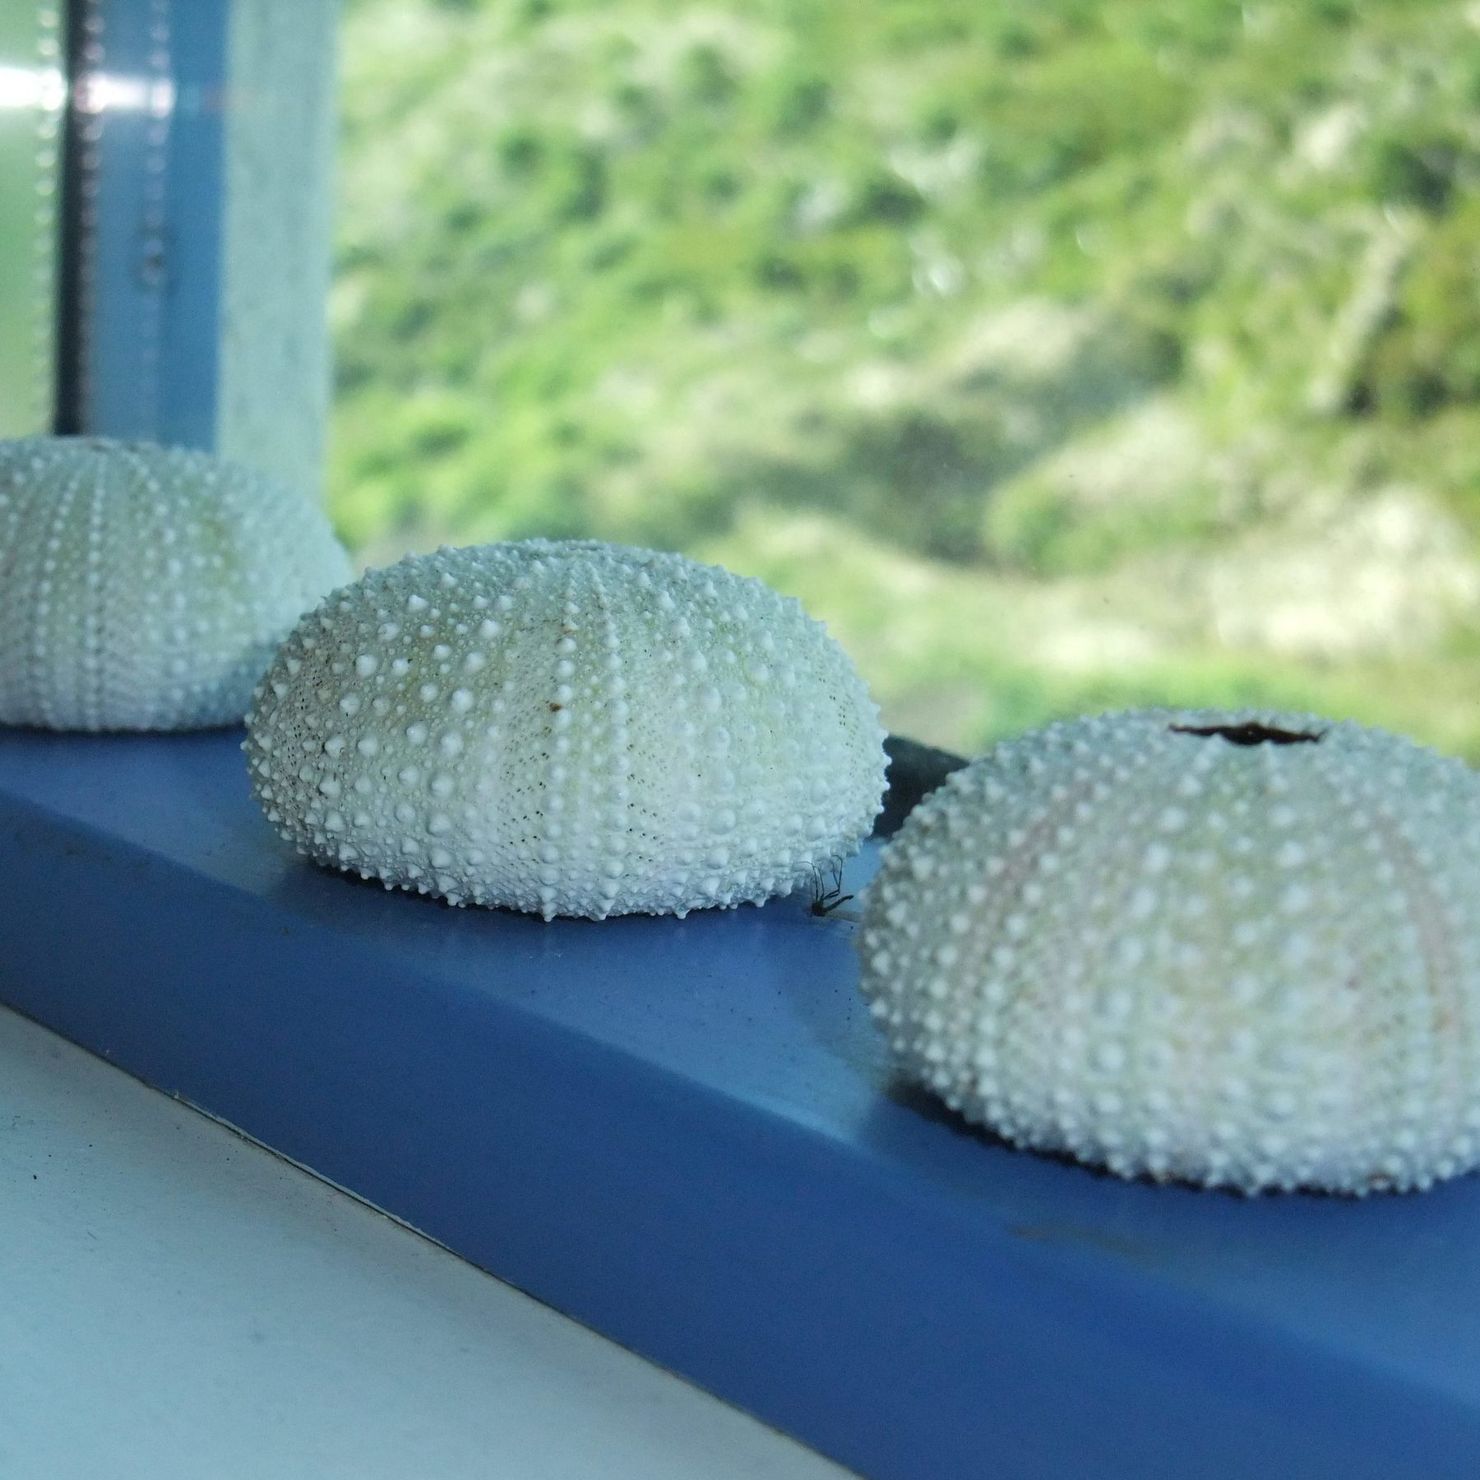 Shells on the window sill bring a maritime mood into the holiday home